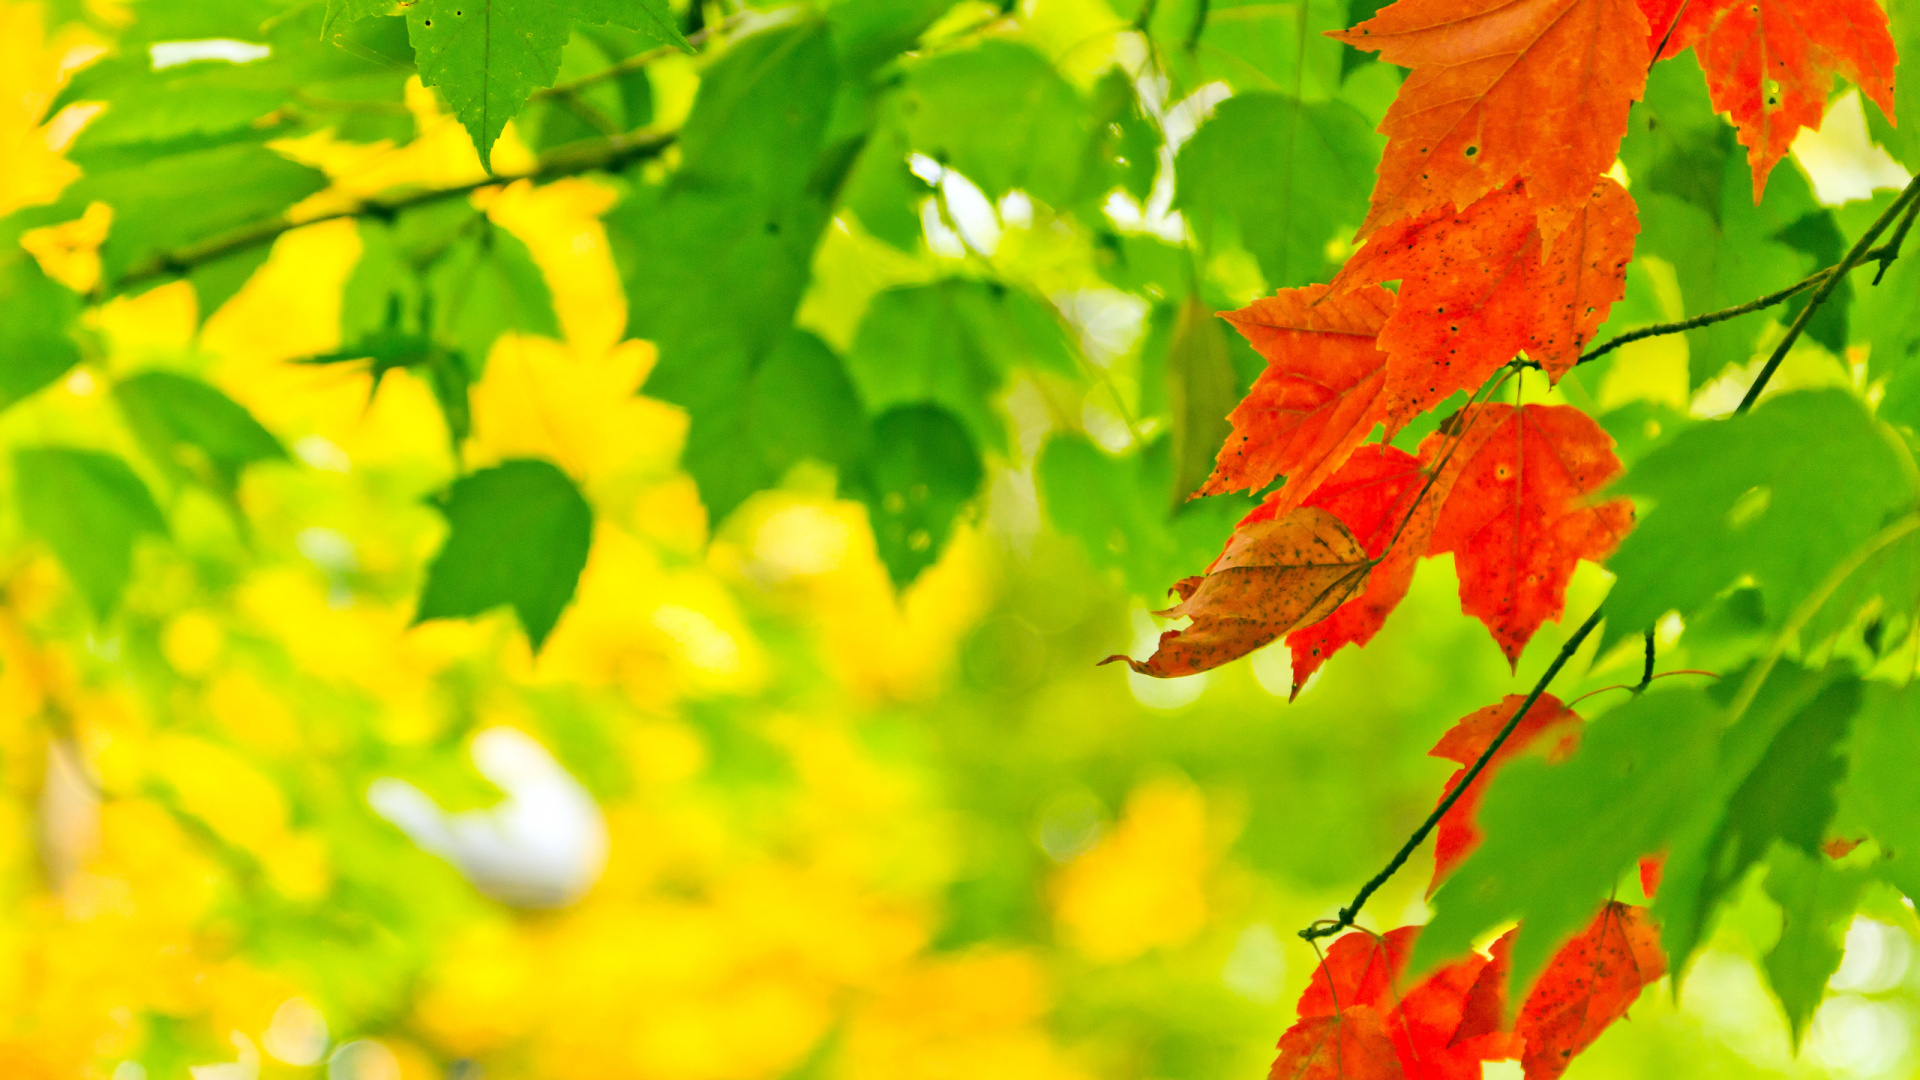 Red and Green Maple Leaf. Wallpaper in 1920x1080 Resolution